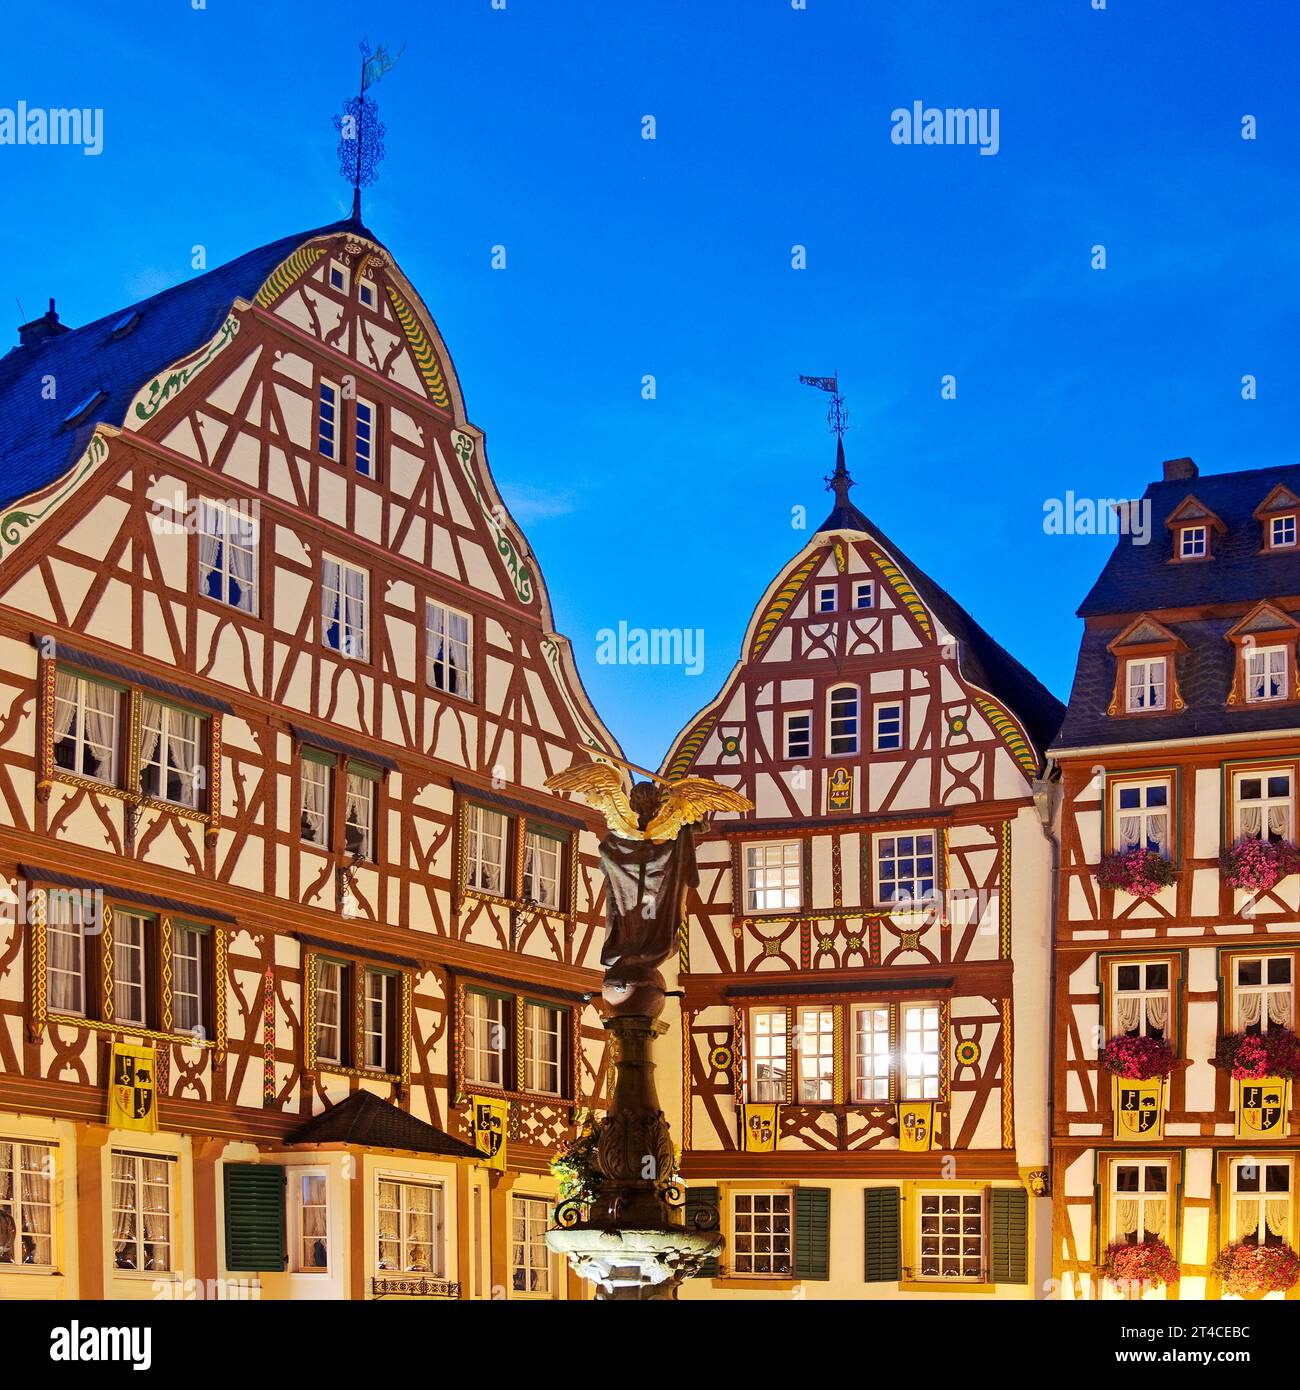 gabled half-timbered houses on the medieval market square in the evening, Germany, Rhineland-Palatinate, Bernkastel-Kues Stock Photo